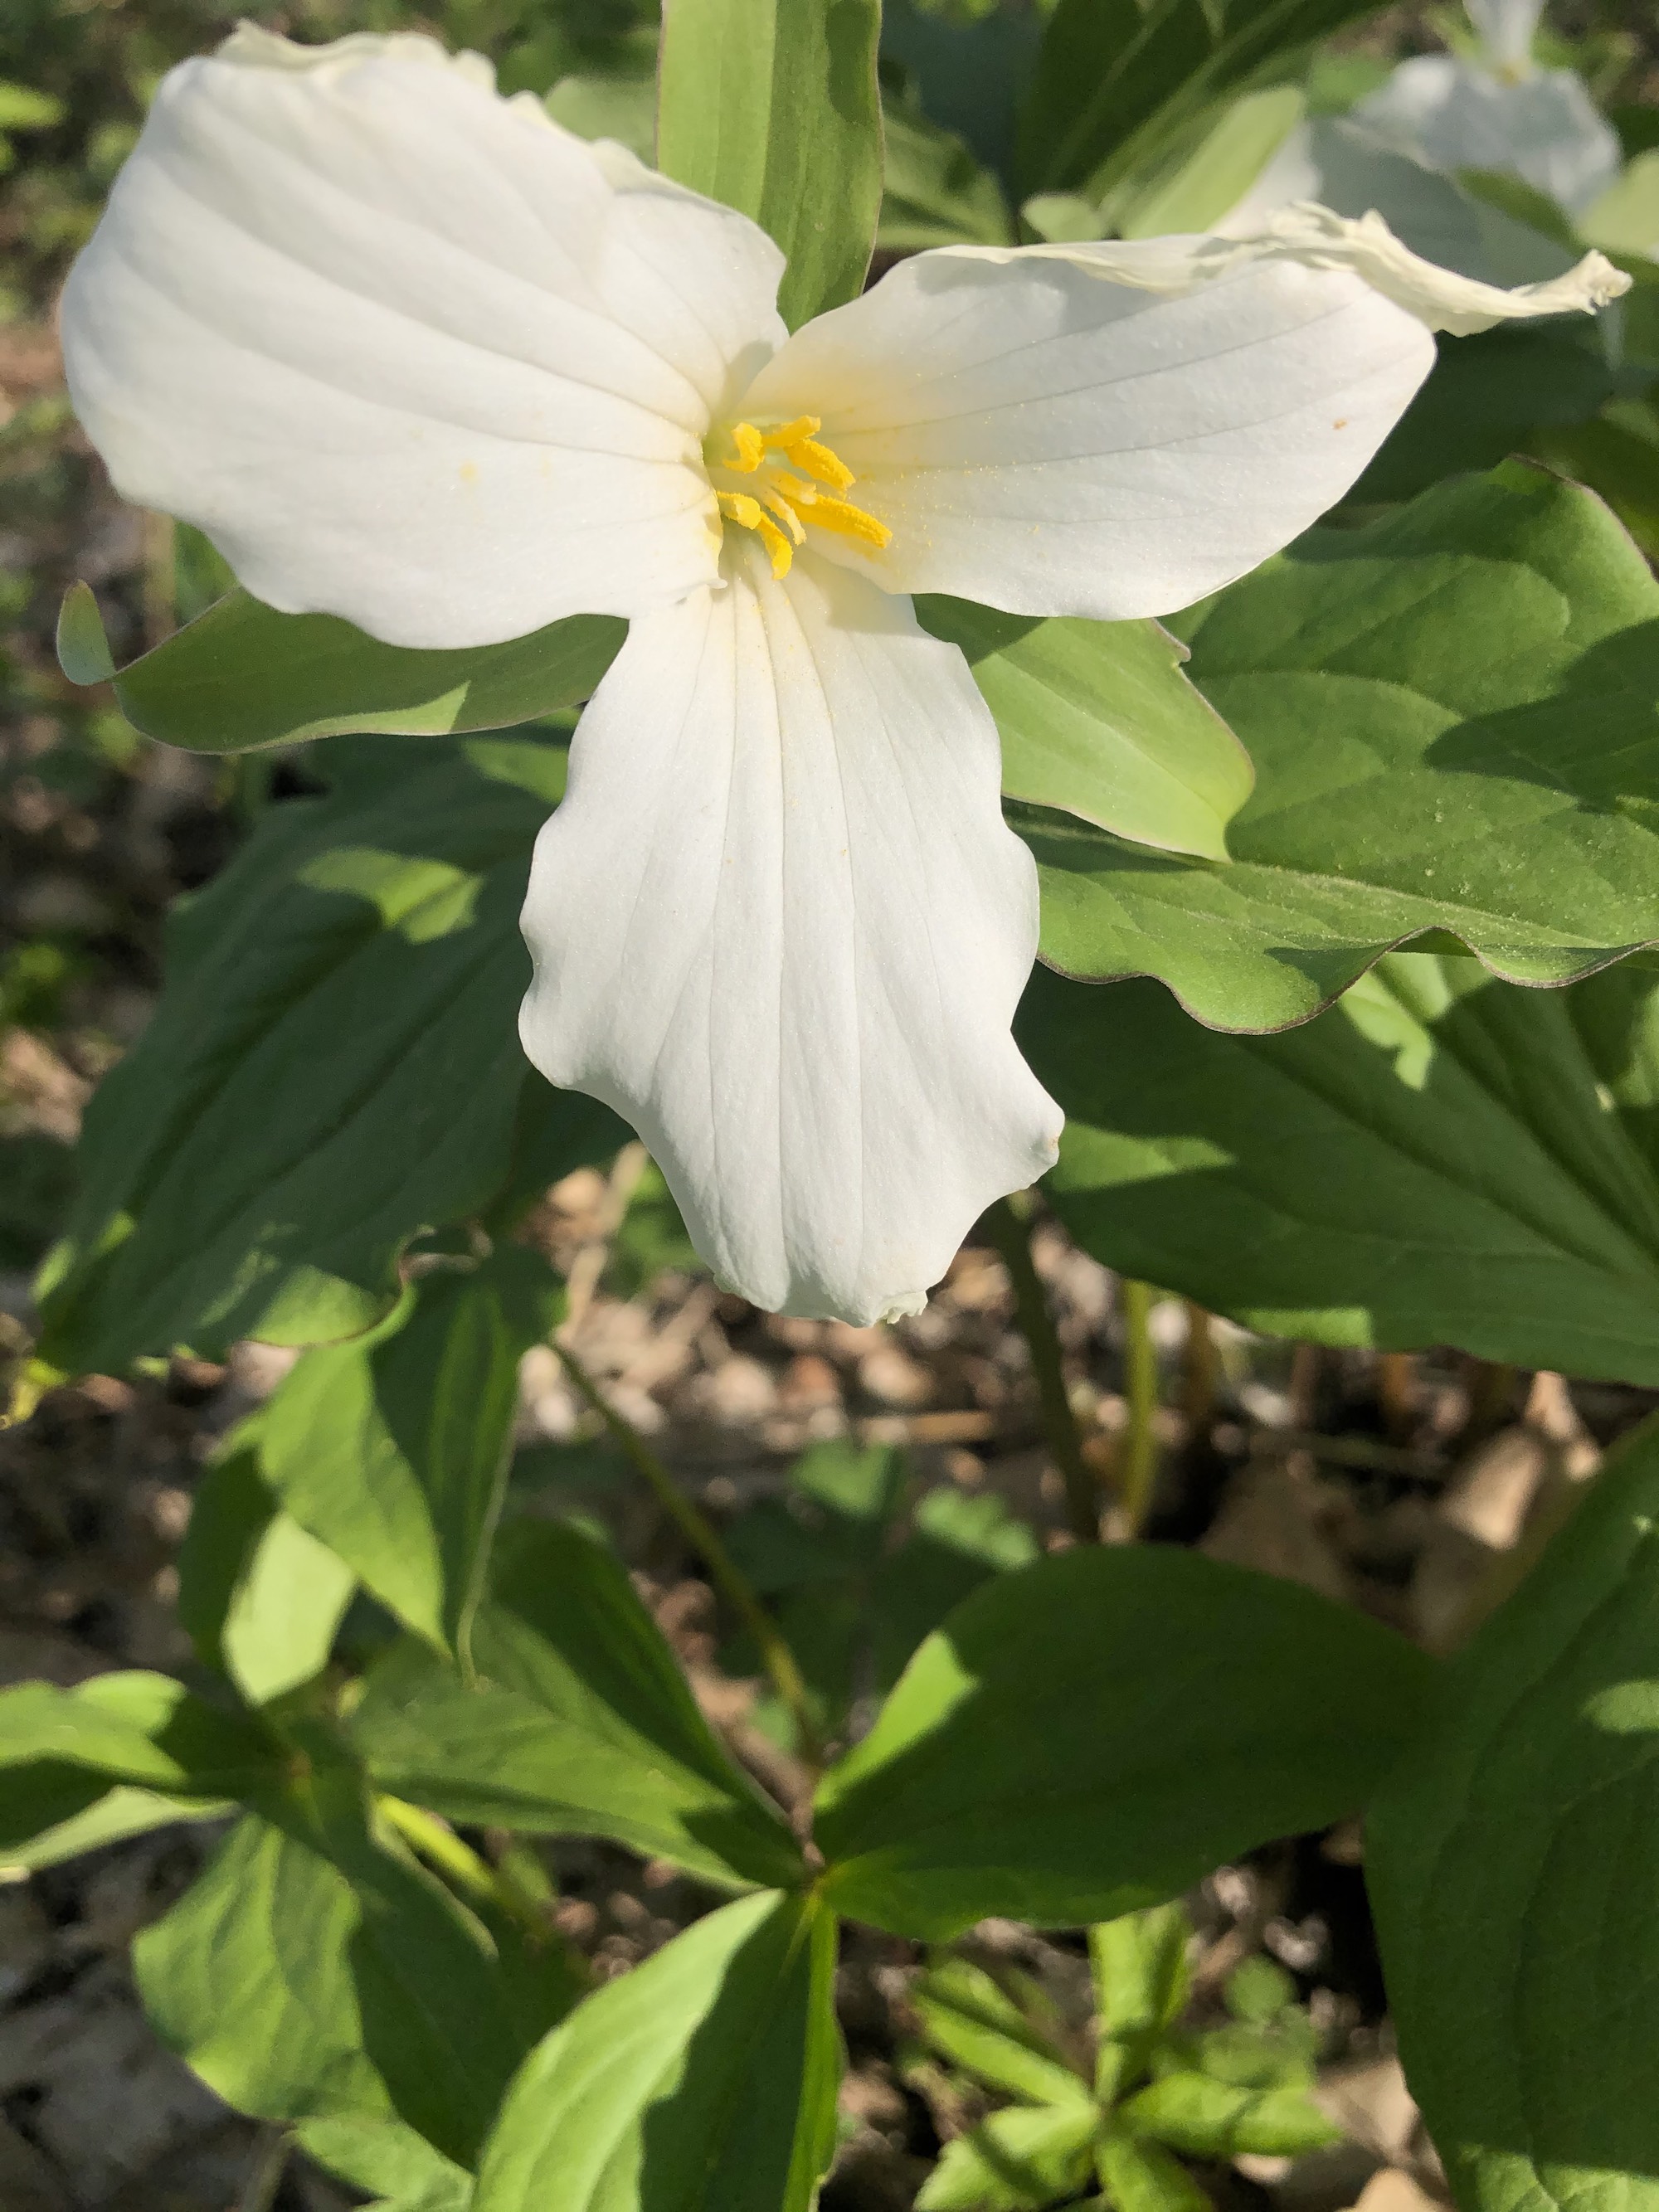 Great White Trillium by Council Ring in Madison, Wisconsin on May 2, 2021.